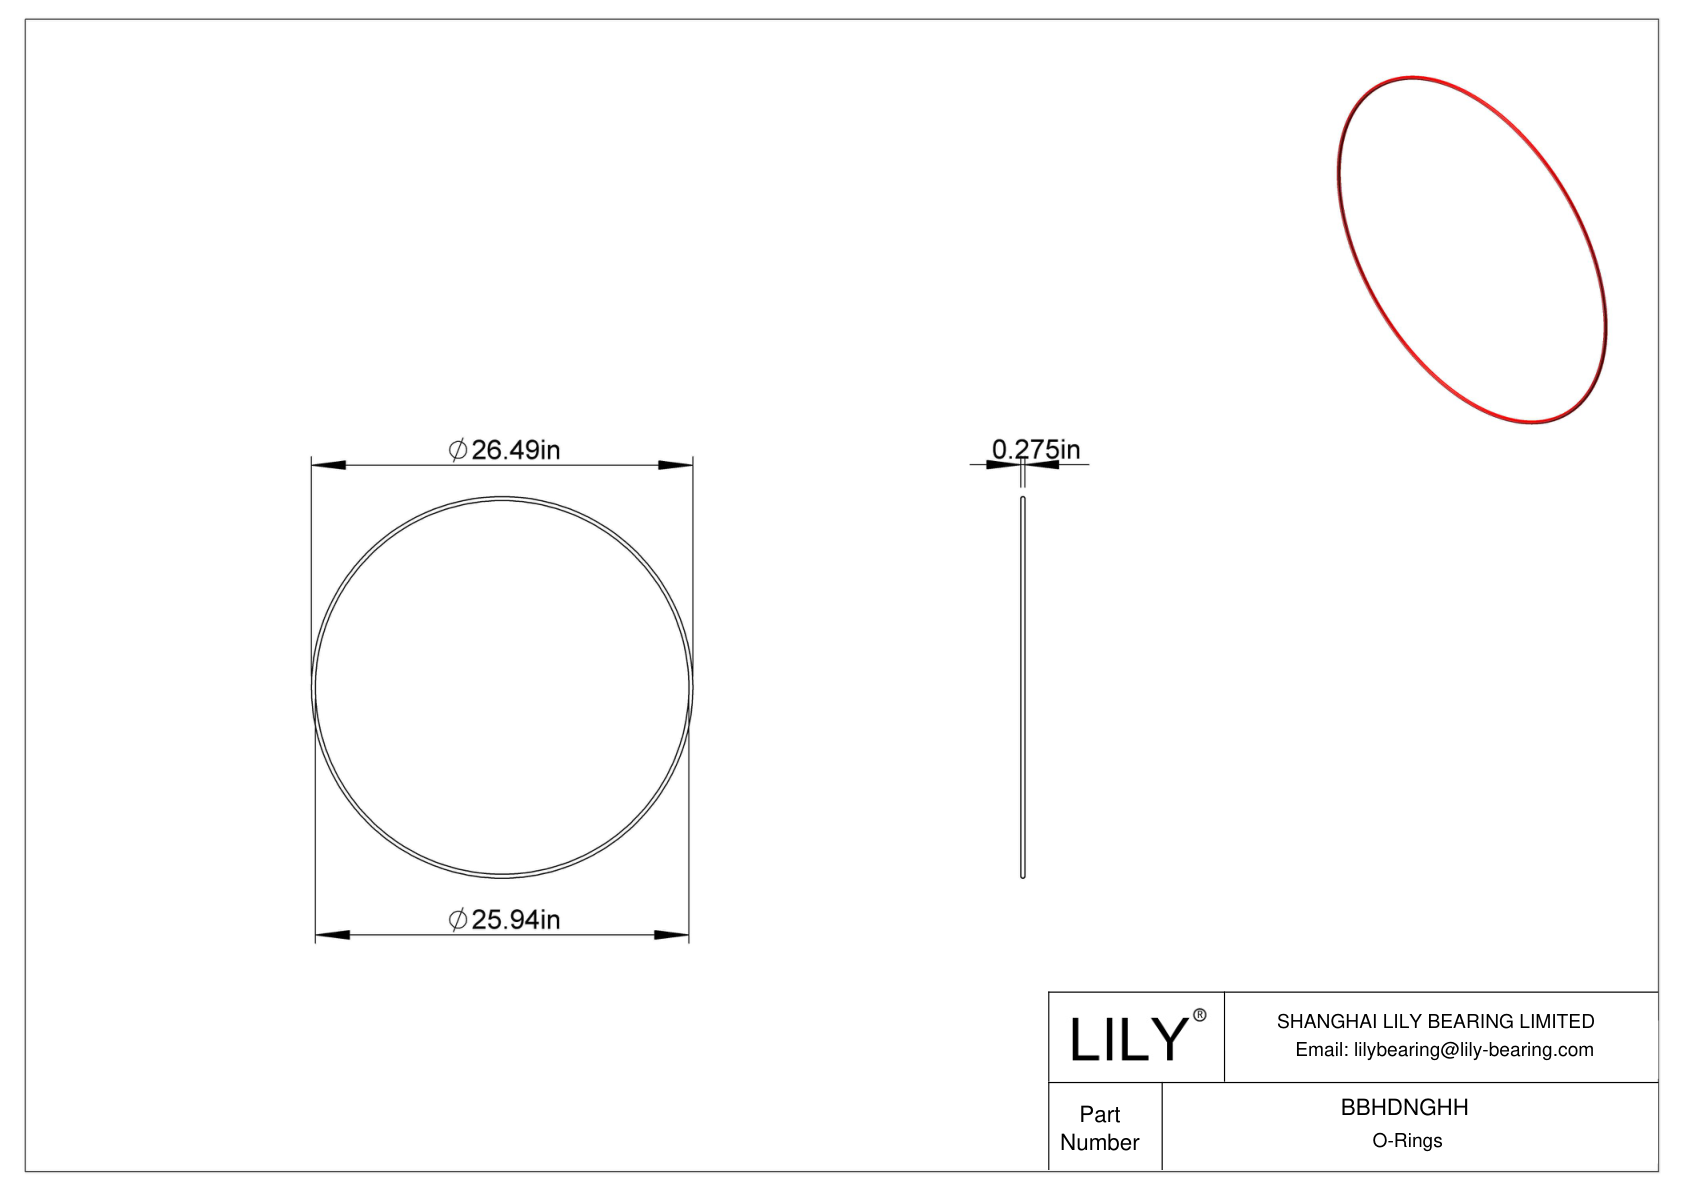 BBHDNGHH High Temperature O-Rings Round cad drawing